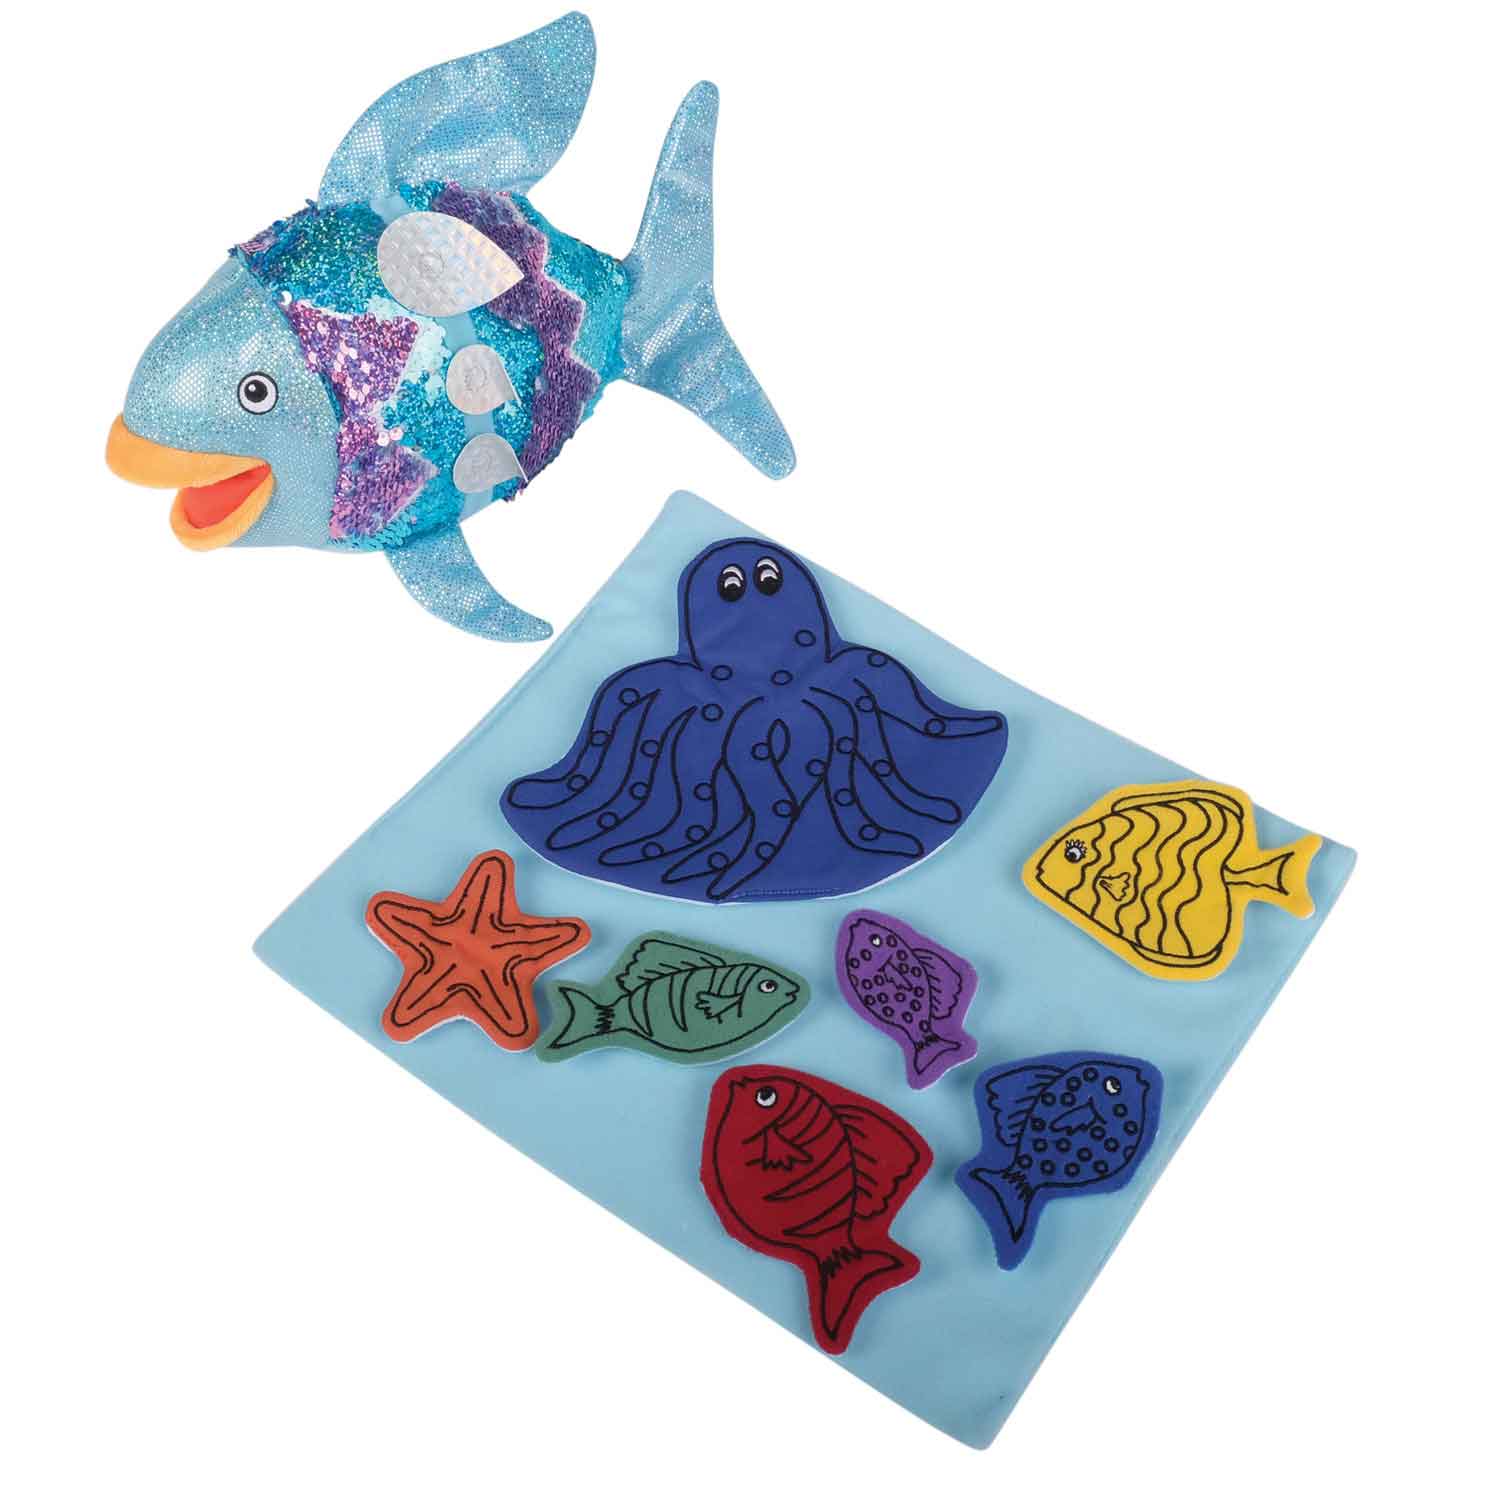 Cre8tive Minds The Rainbow Fish Puppet and Prop Set for Storytelling